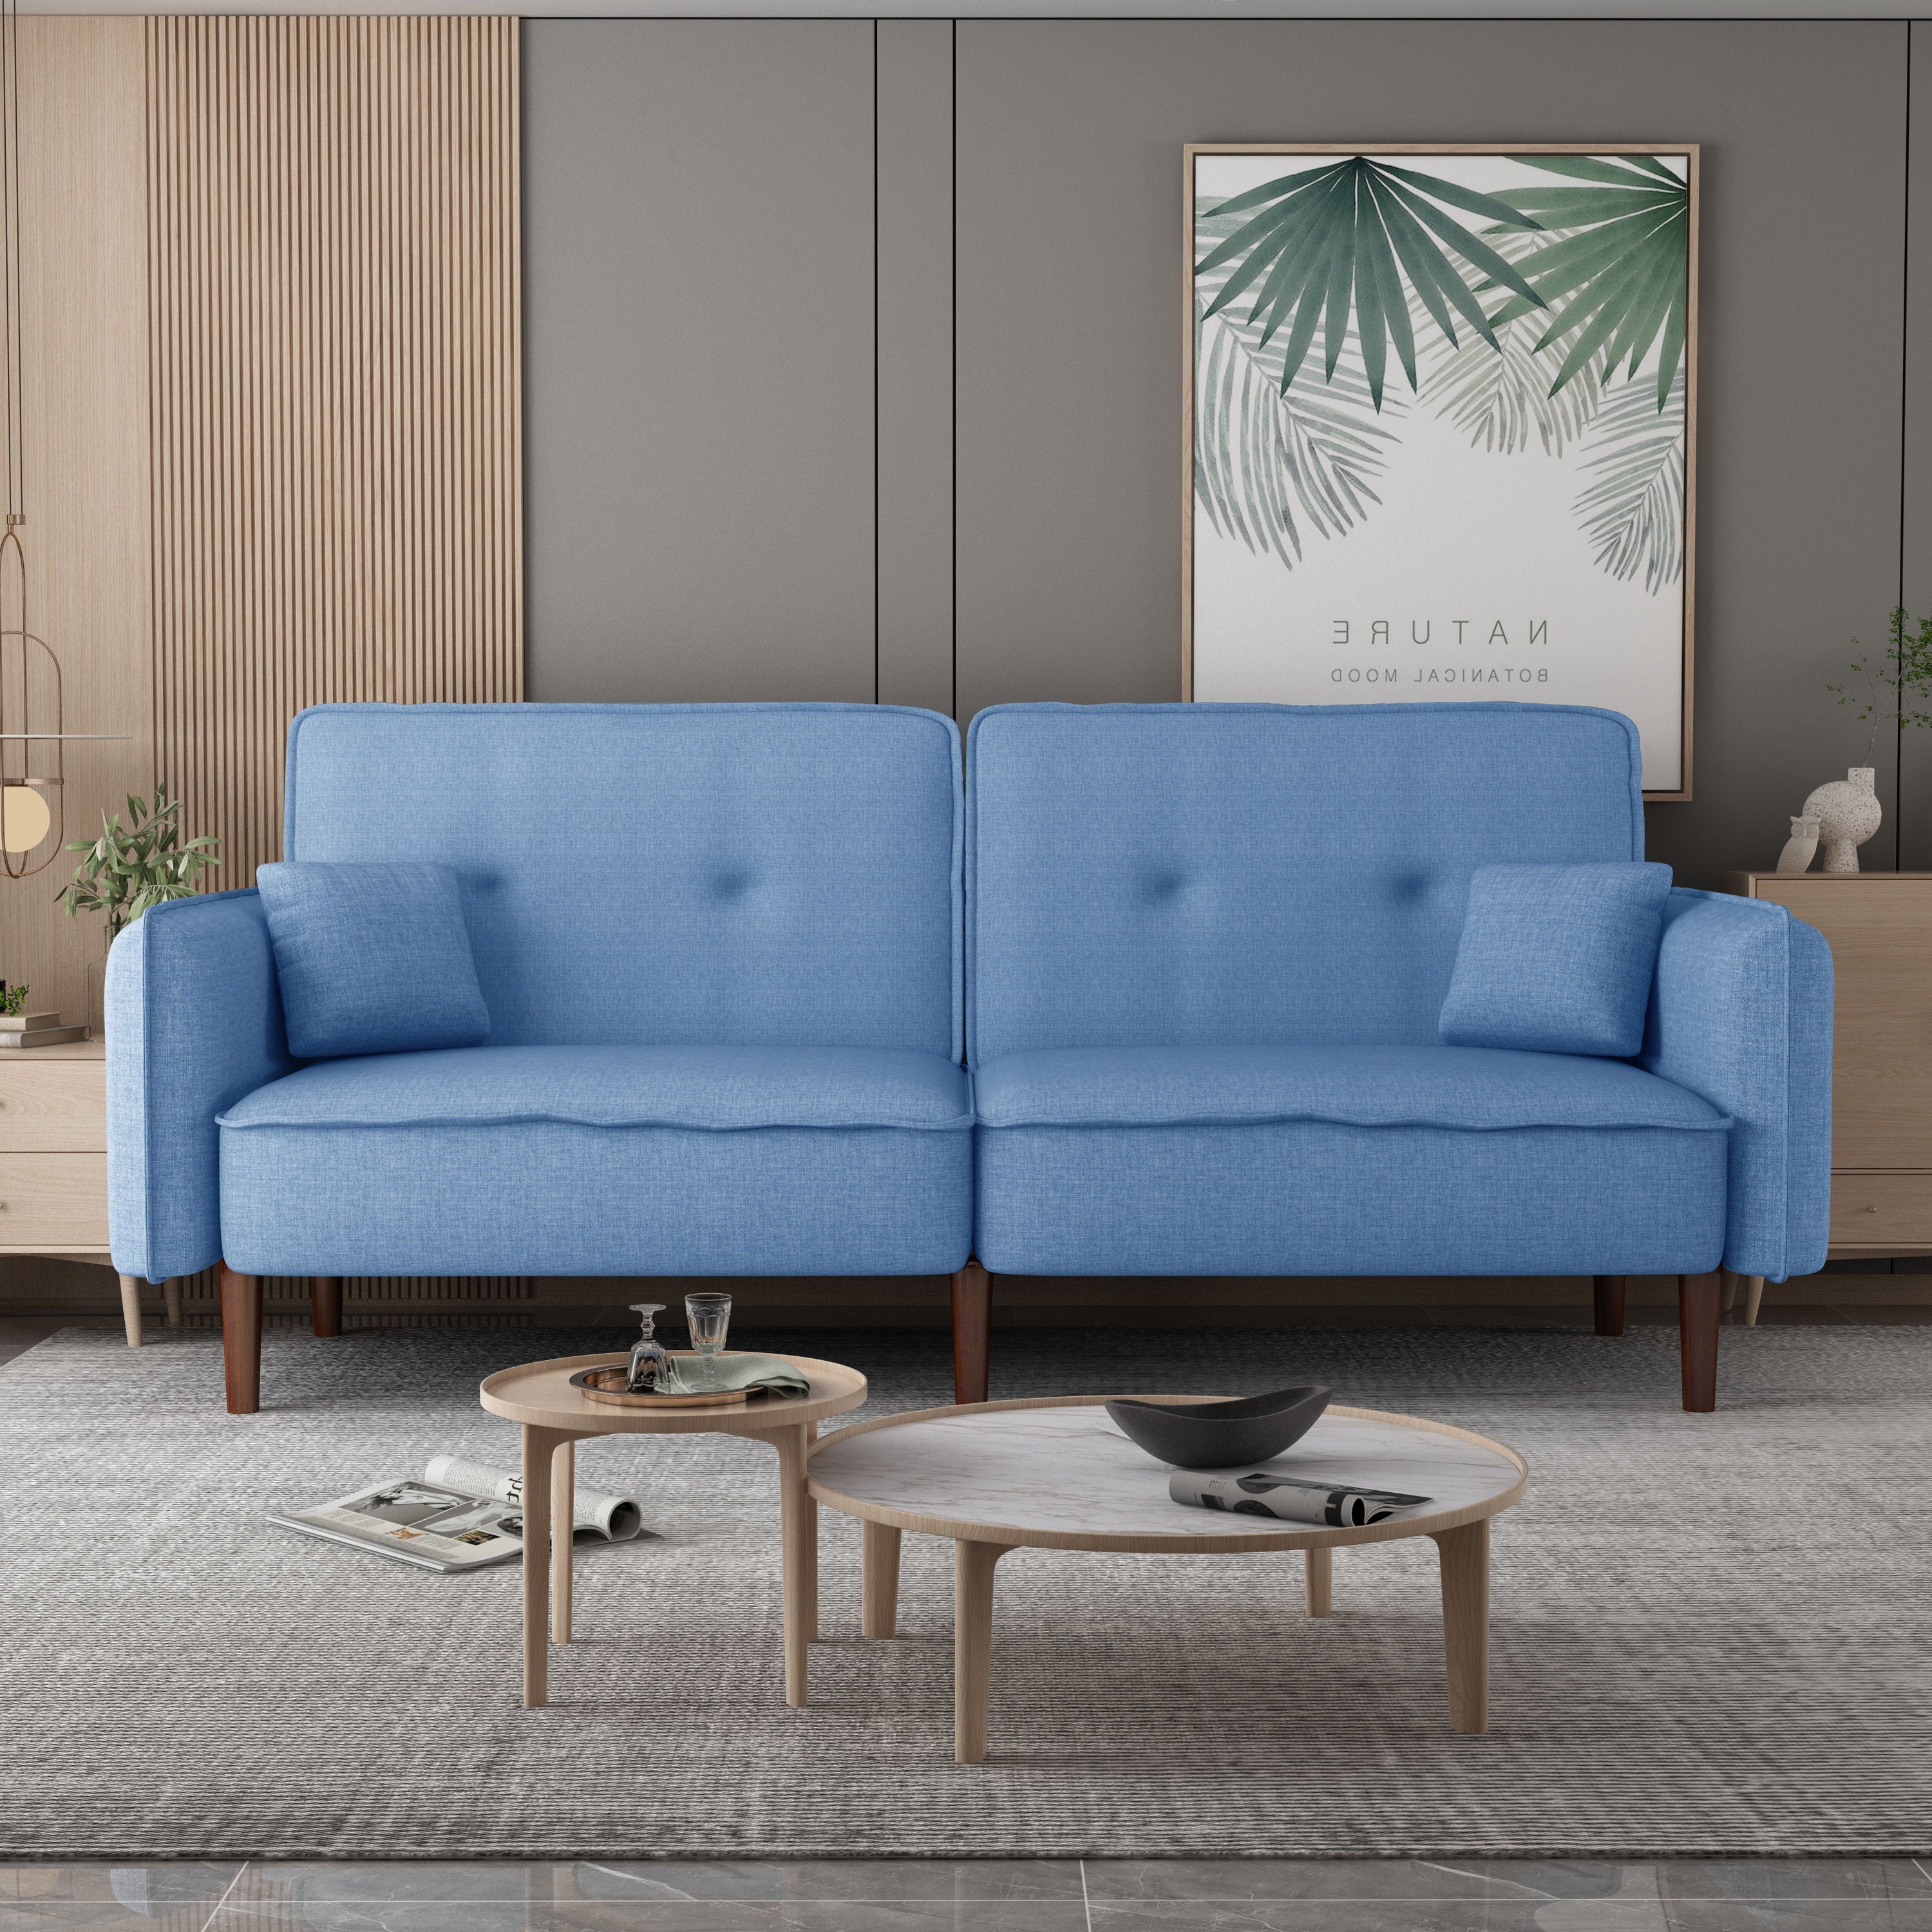 Bed Room Leisure Futon Sofa Bed In Blue Fabric With Solid Wood Leg